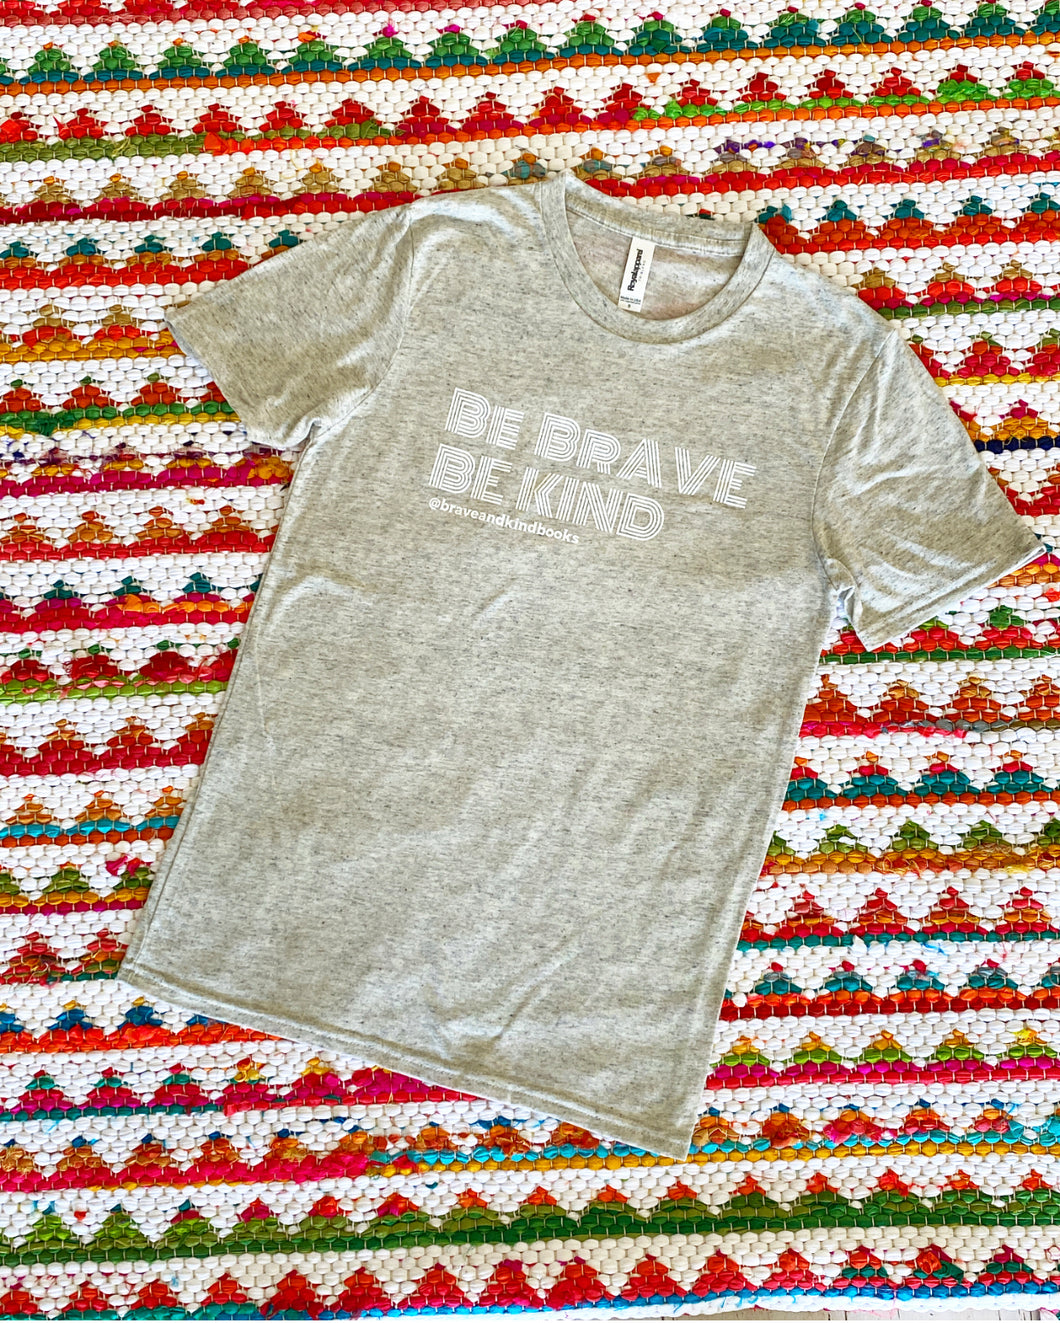 Be Brave + Be Kind Tee - Adult